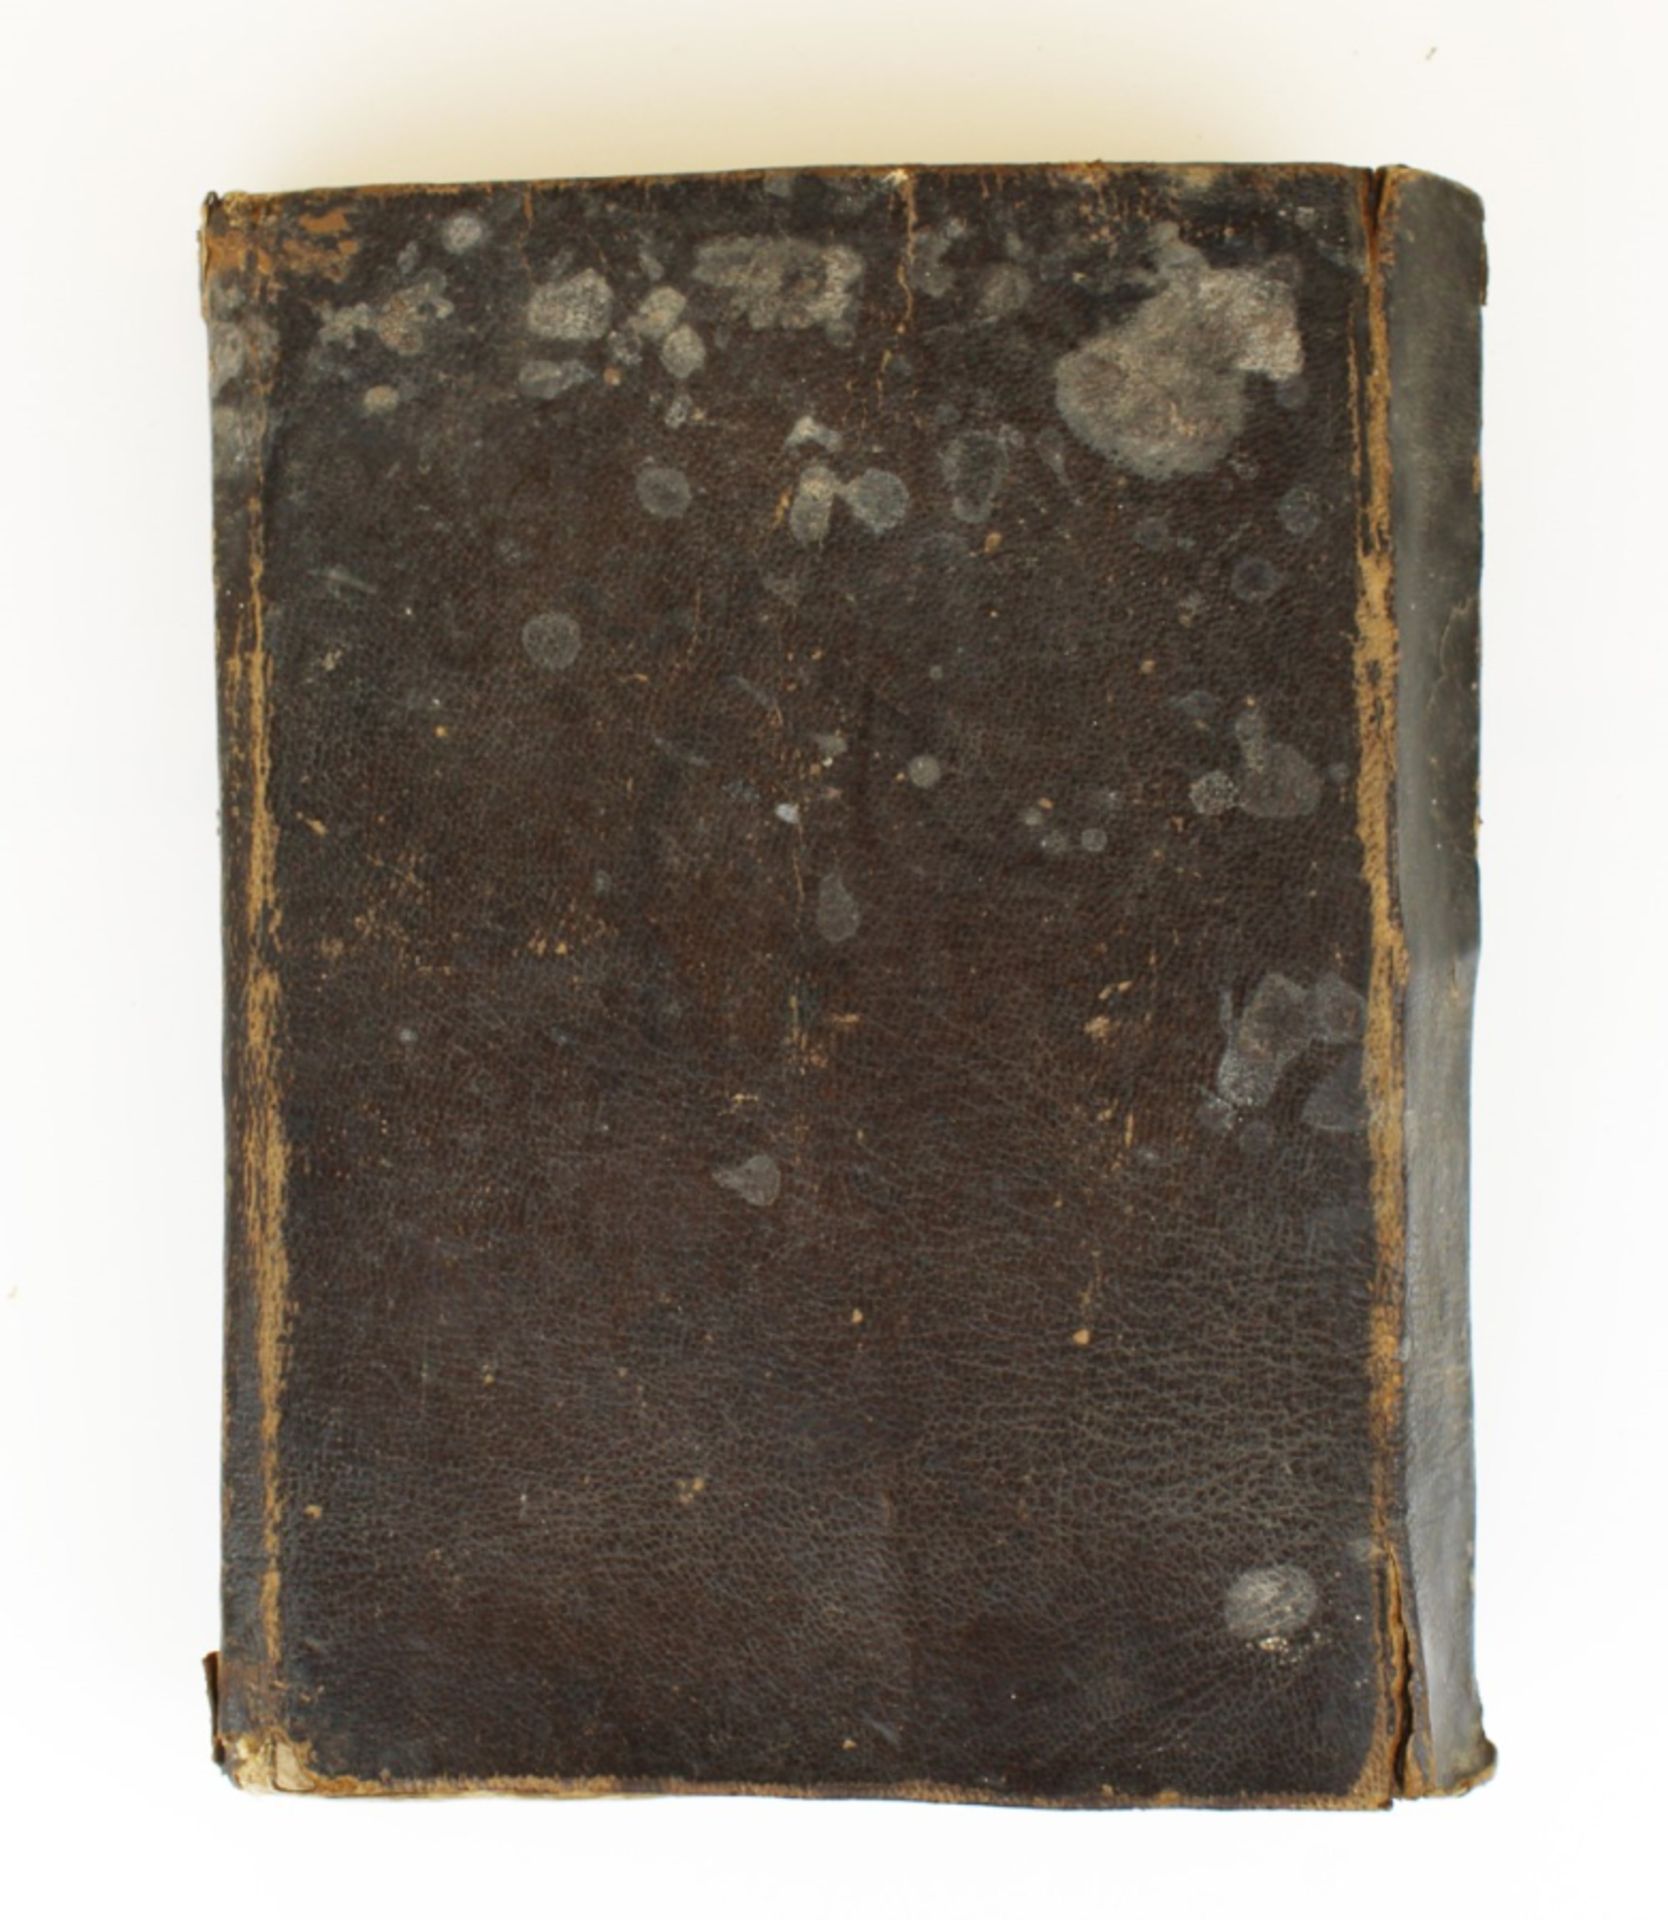 Ottoman period book of Fiqh - Image 19 of 21